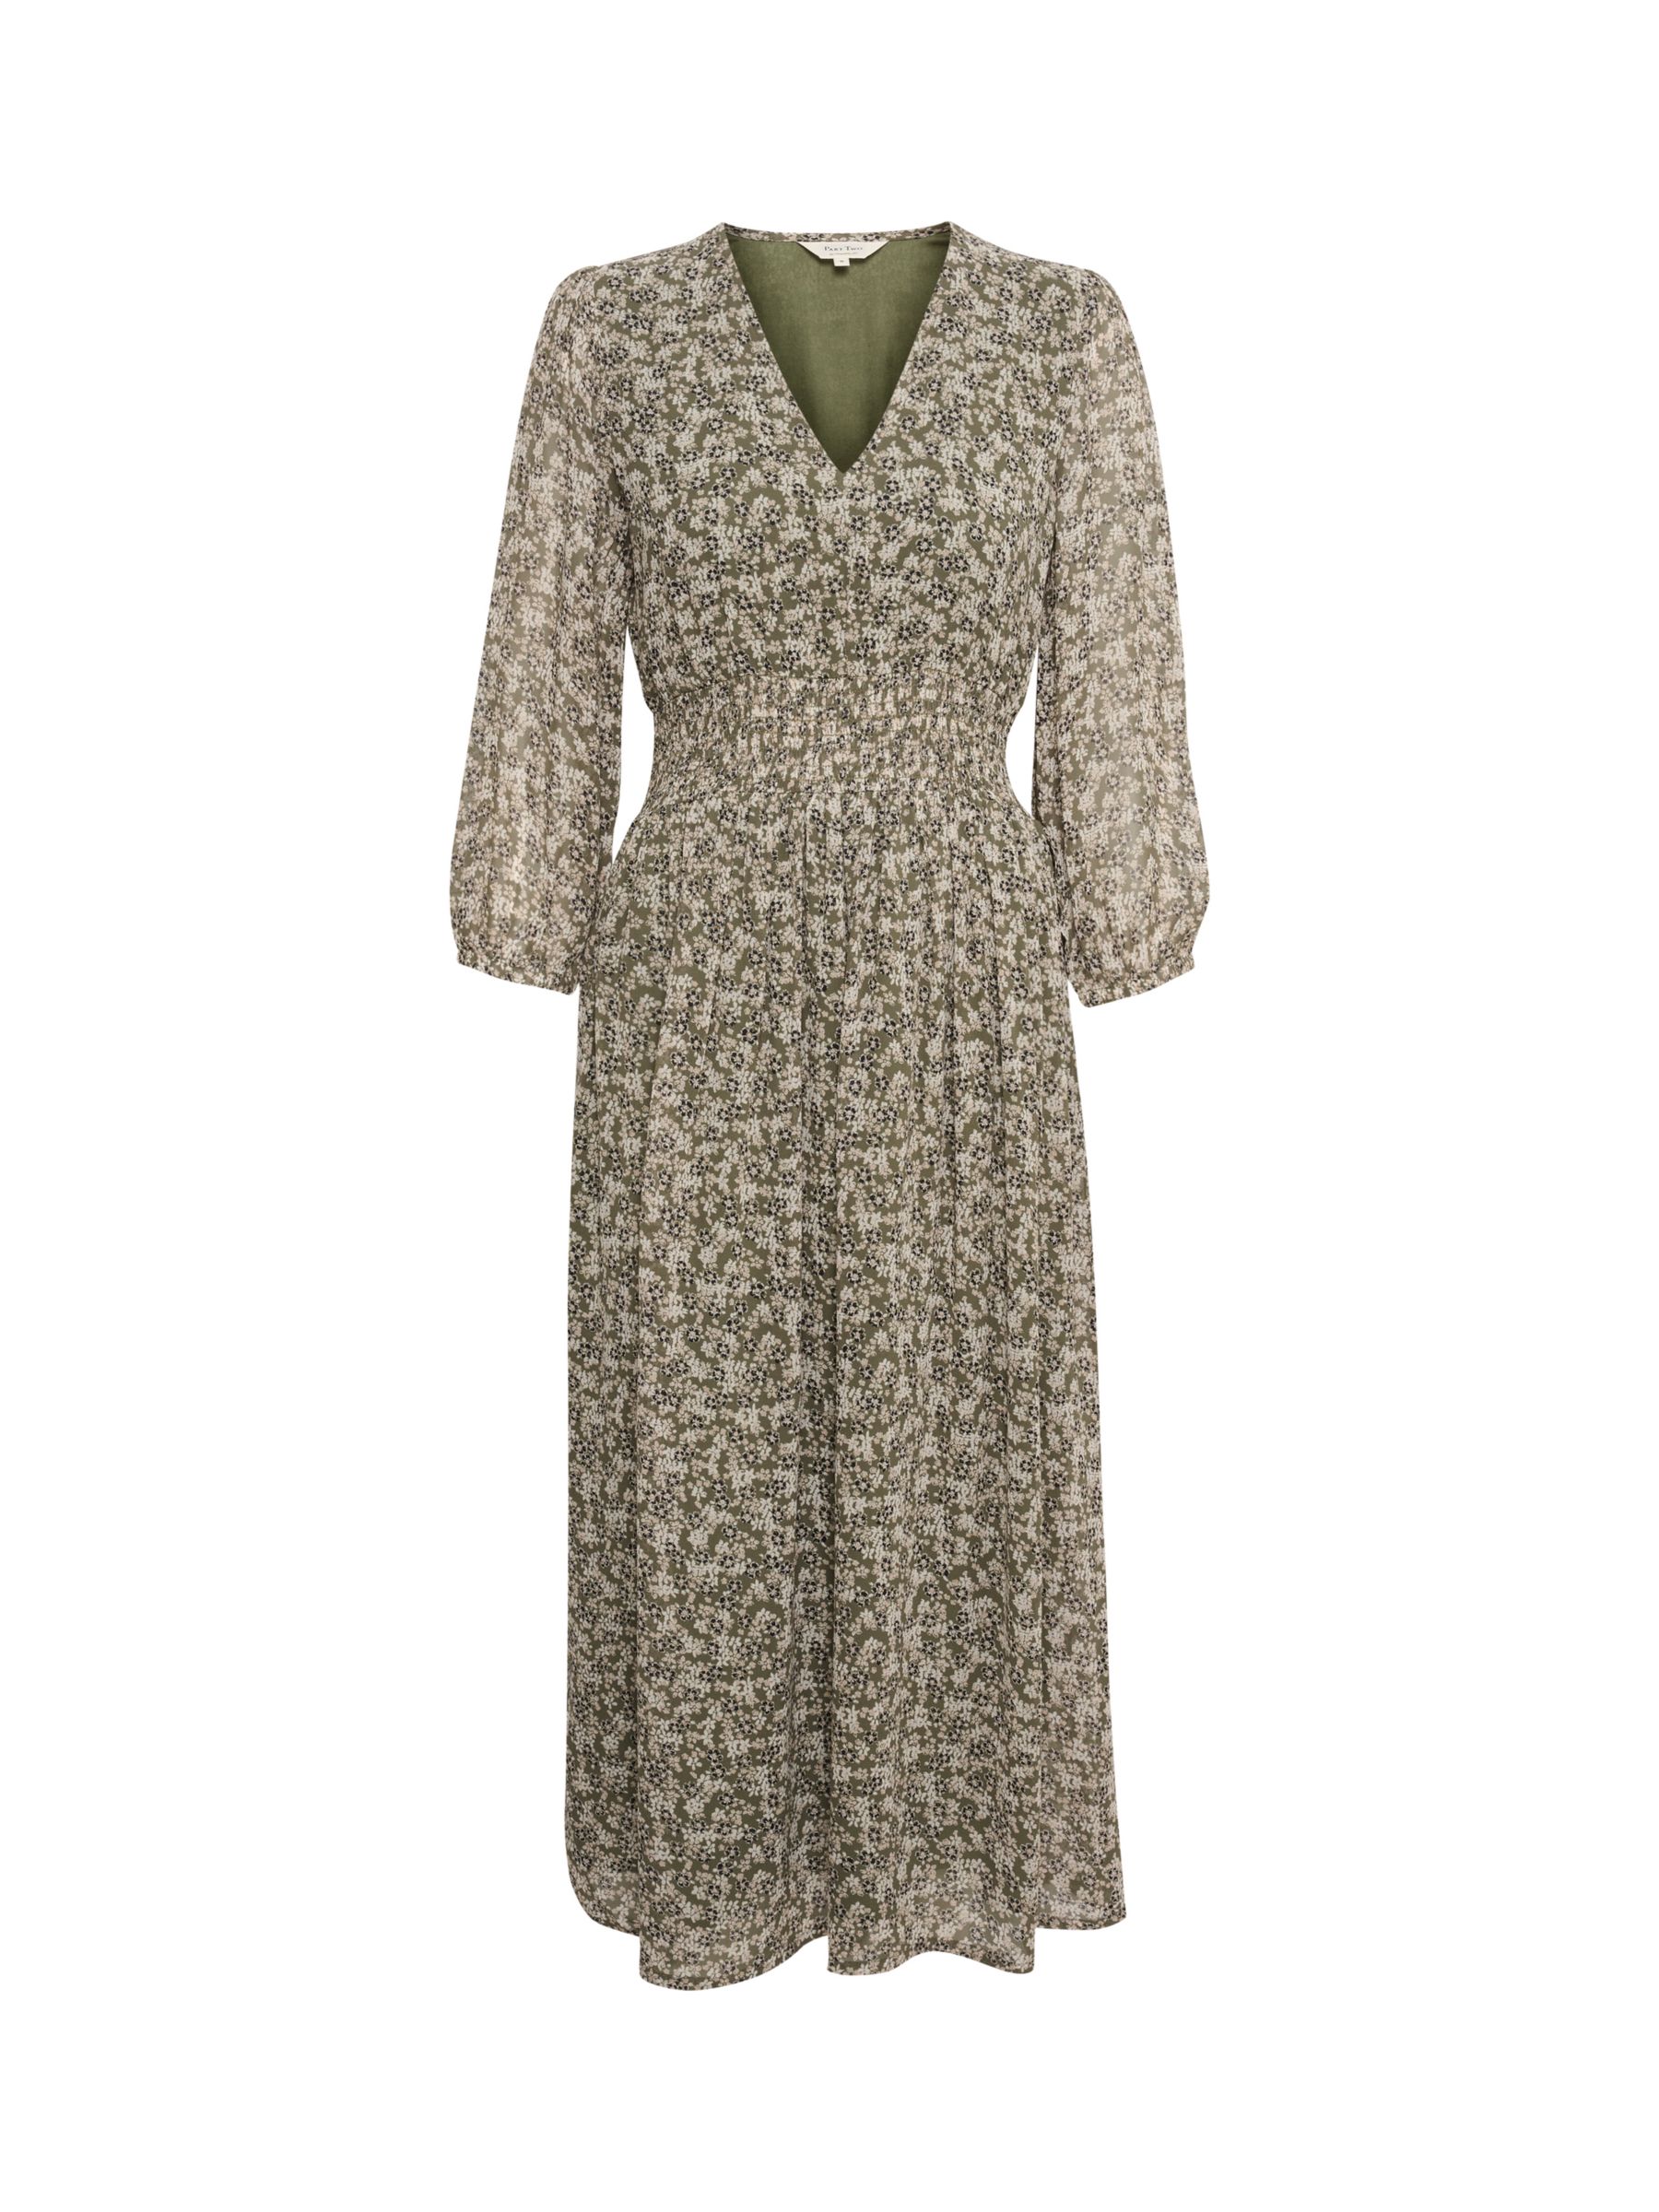 Buy Part Two Siraline Floral Midi Dress Online at johnlewis.com